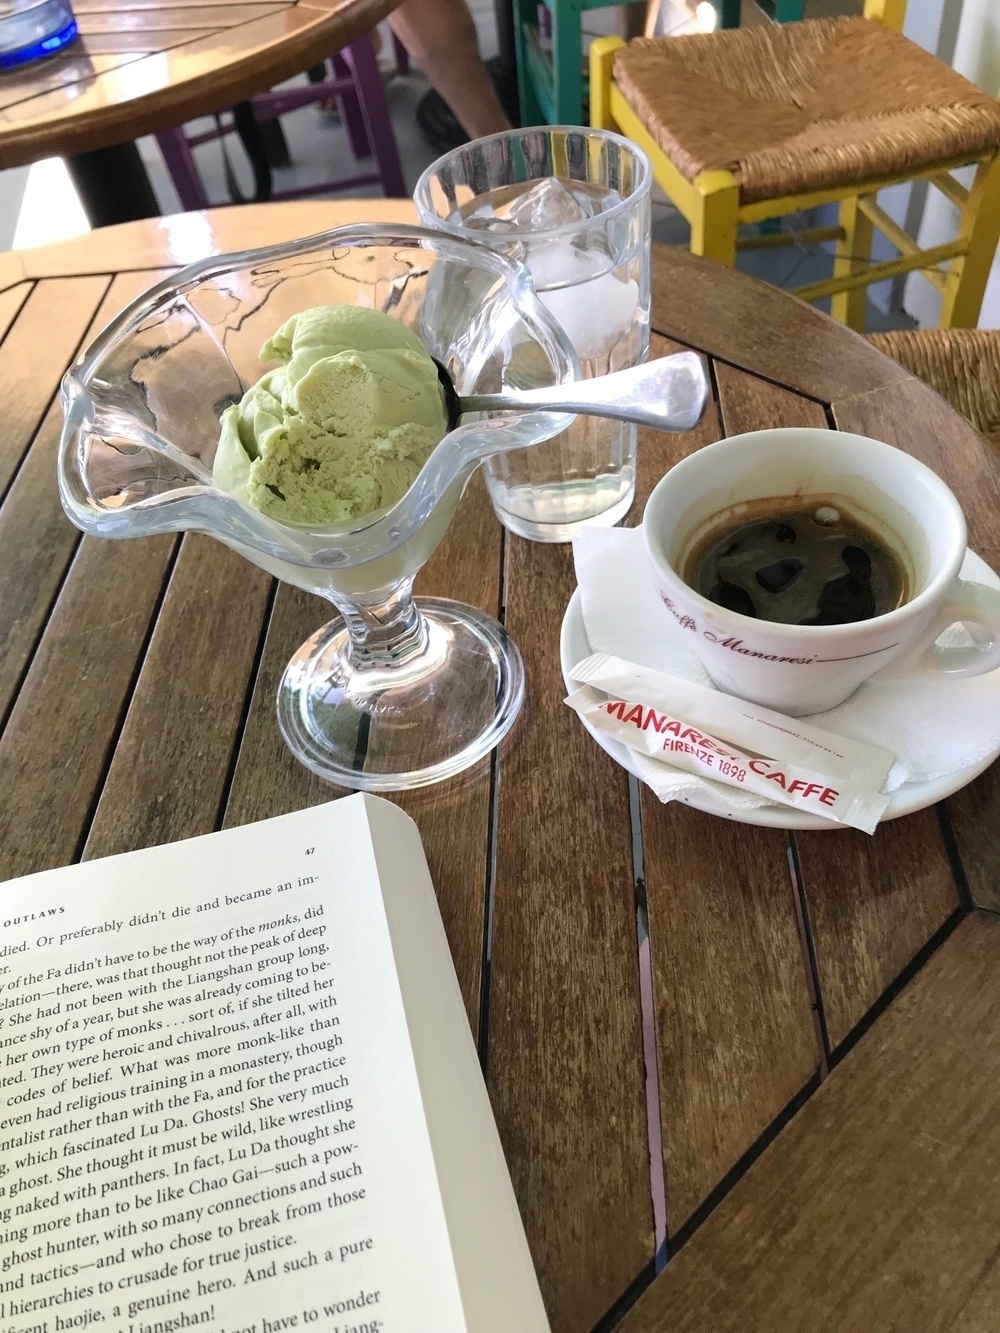 A cup of coffee and a bowl containing a scoop of ice cream on a cafe table. The upper part of the right page of a book is also visible.